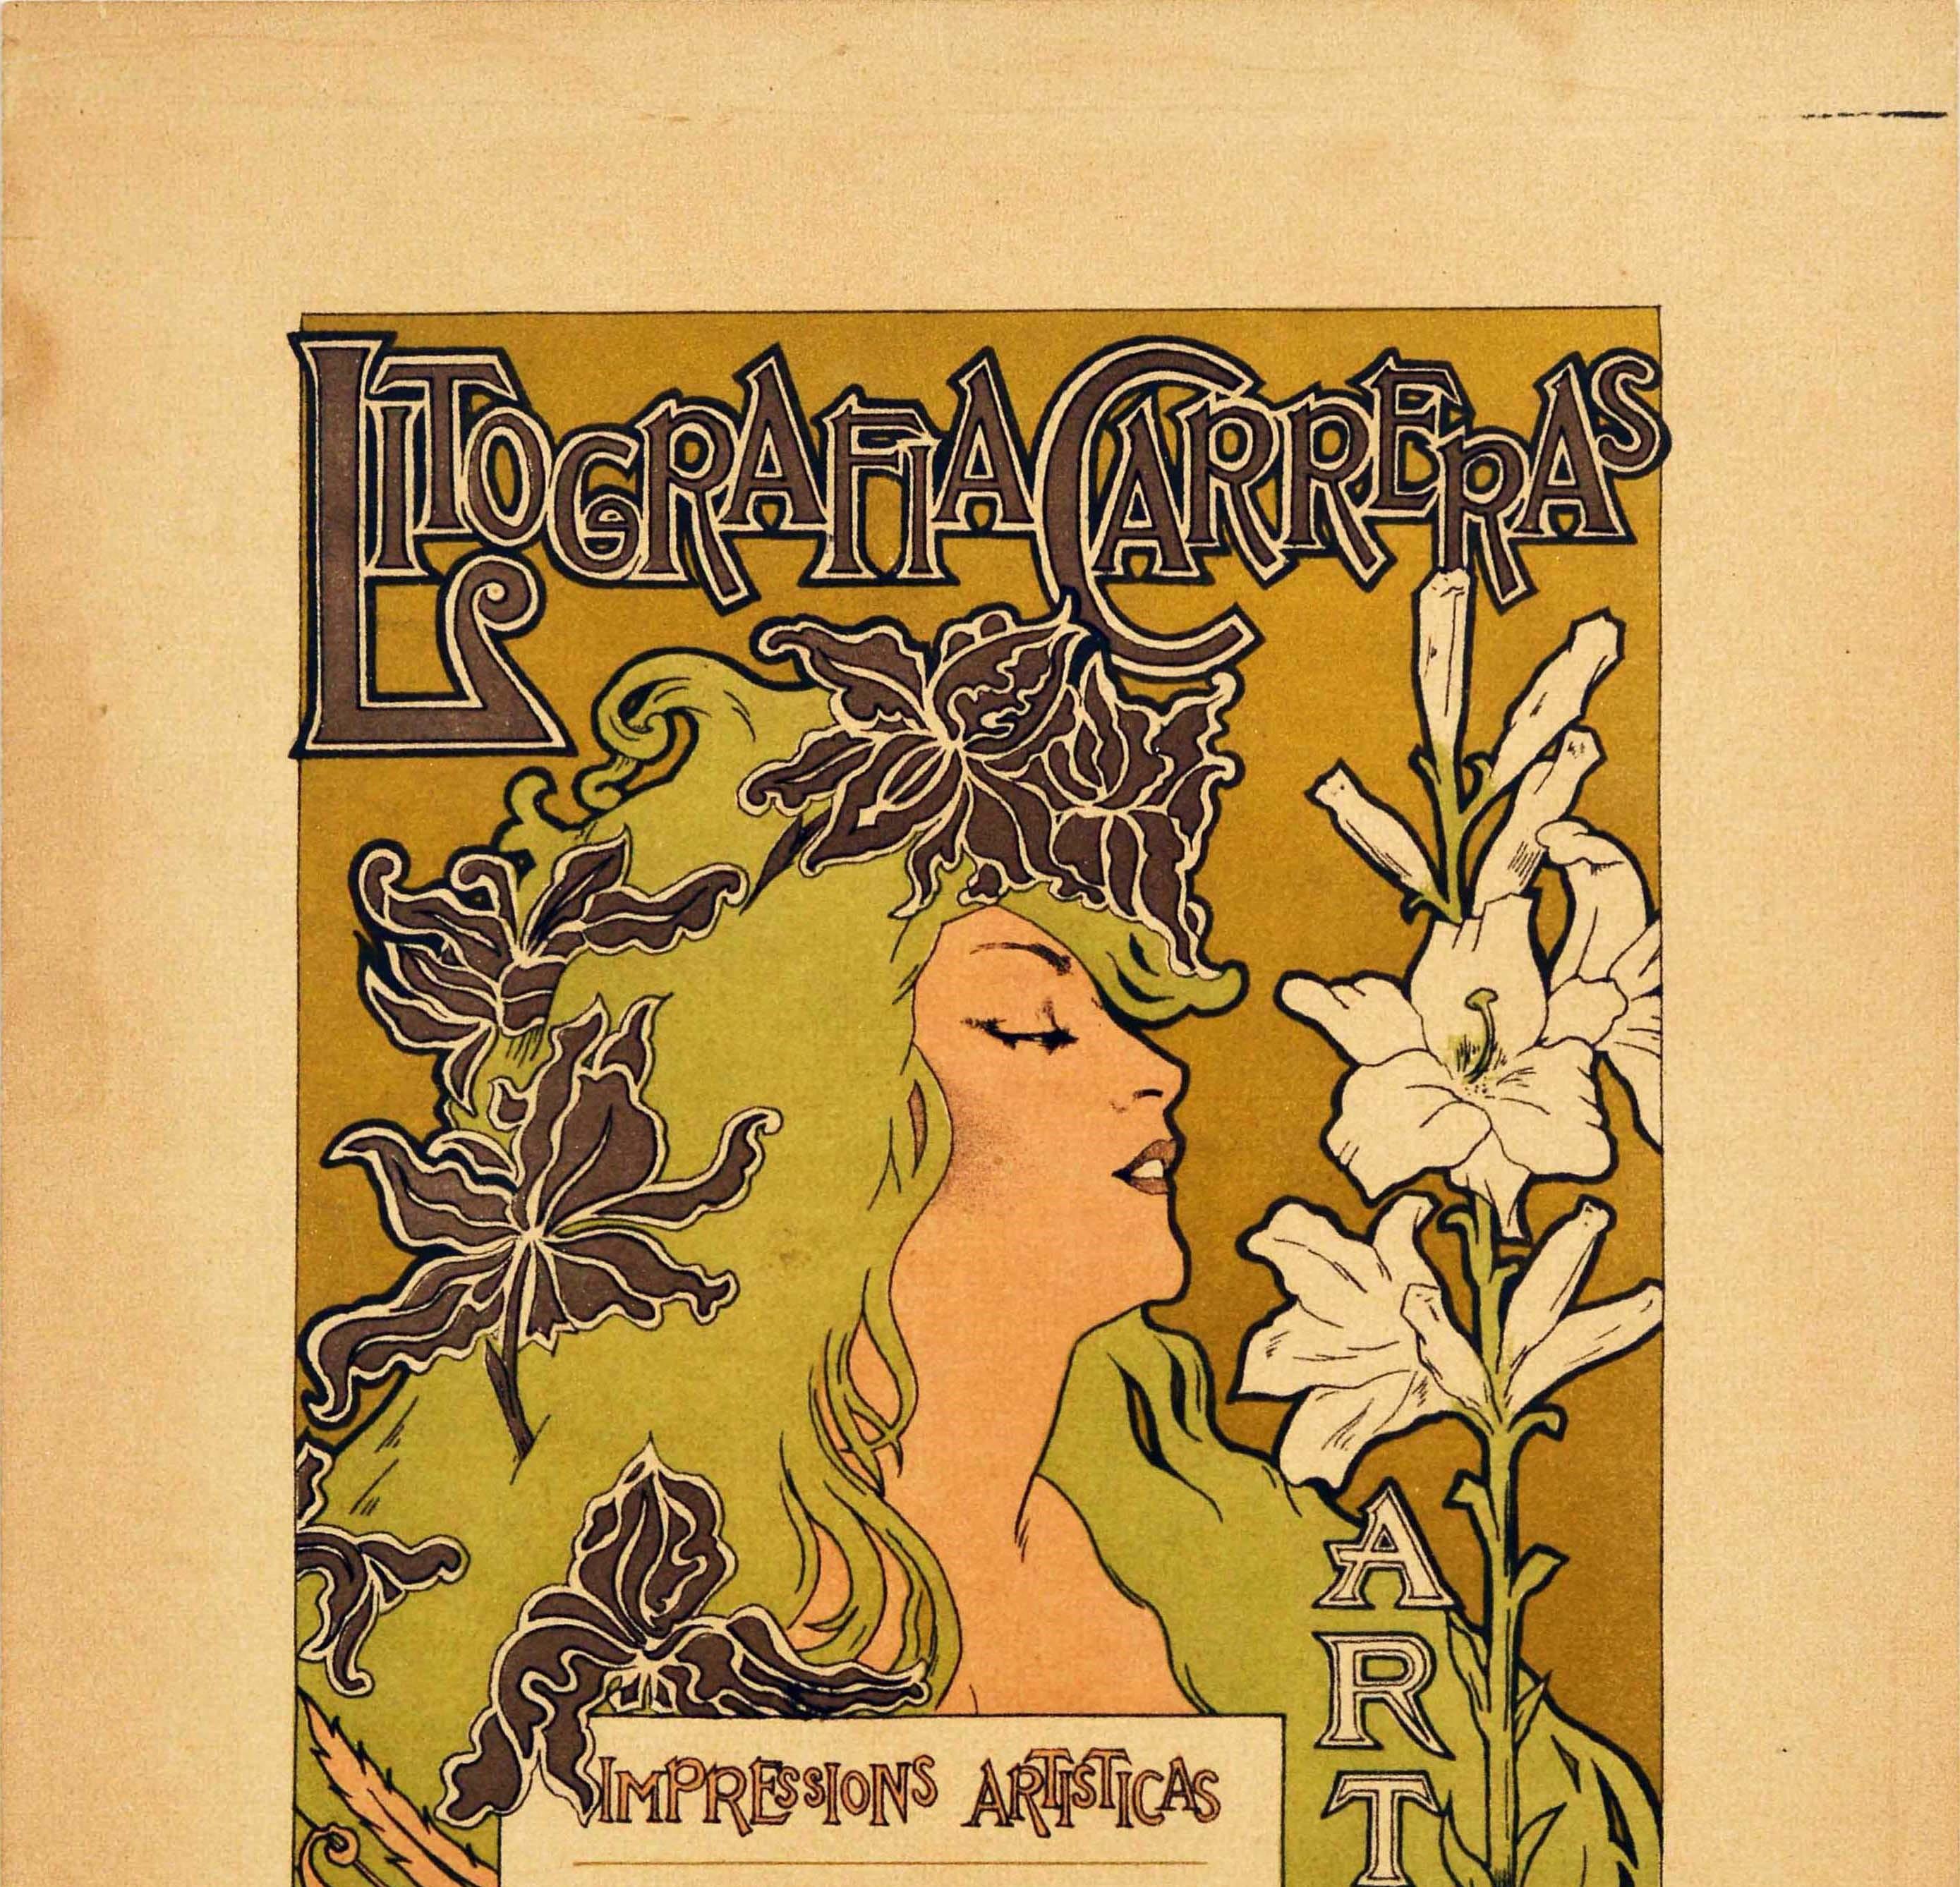 Original antique advertising poster for Litografia Carreras Lithography in the flowing Art Nouveau style of Mucha featuring a stunning image of an elegant lady holding a white lily flower in her hand with the word Art running vertically down next to